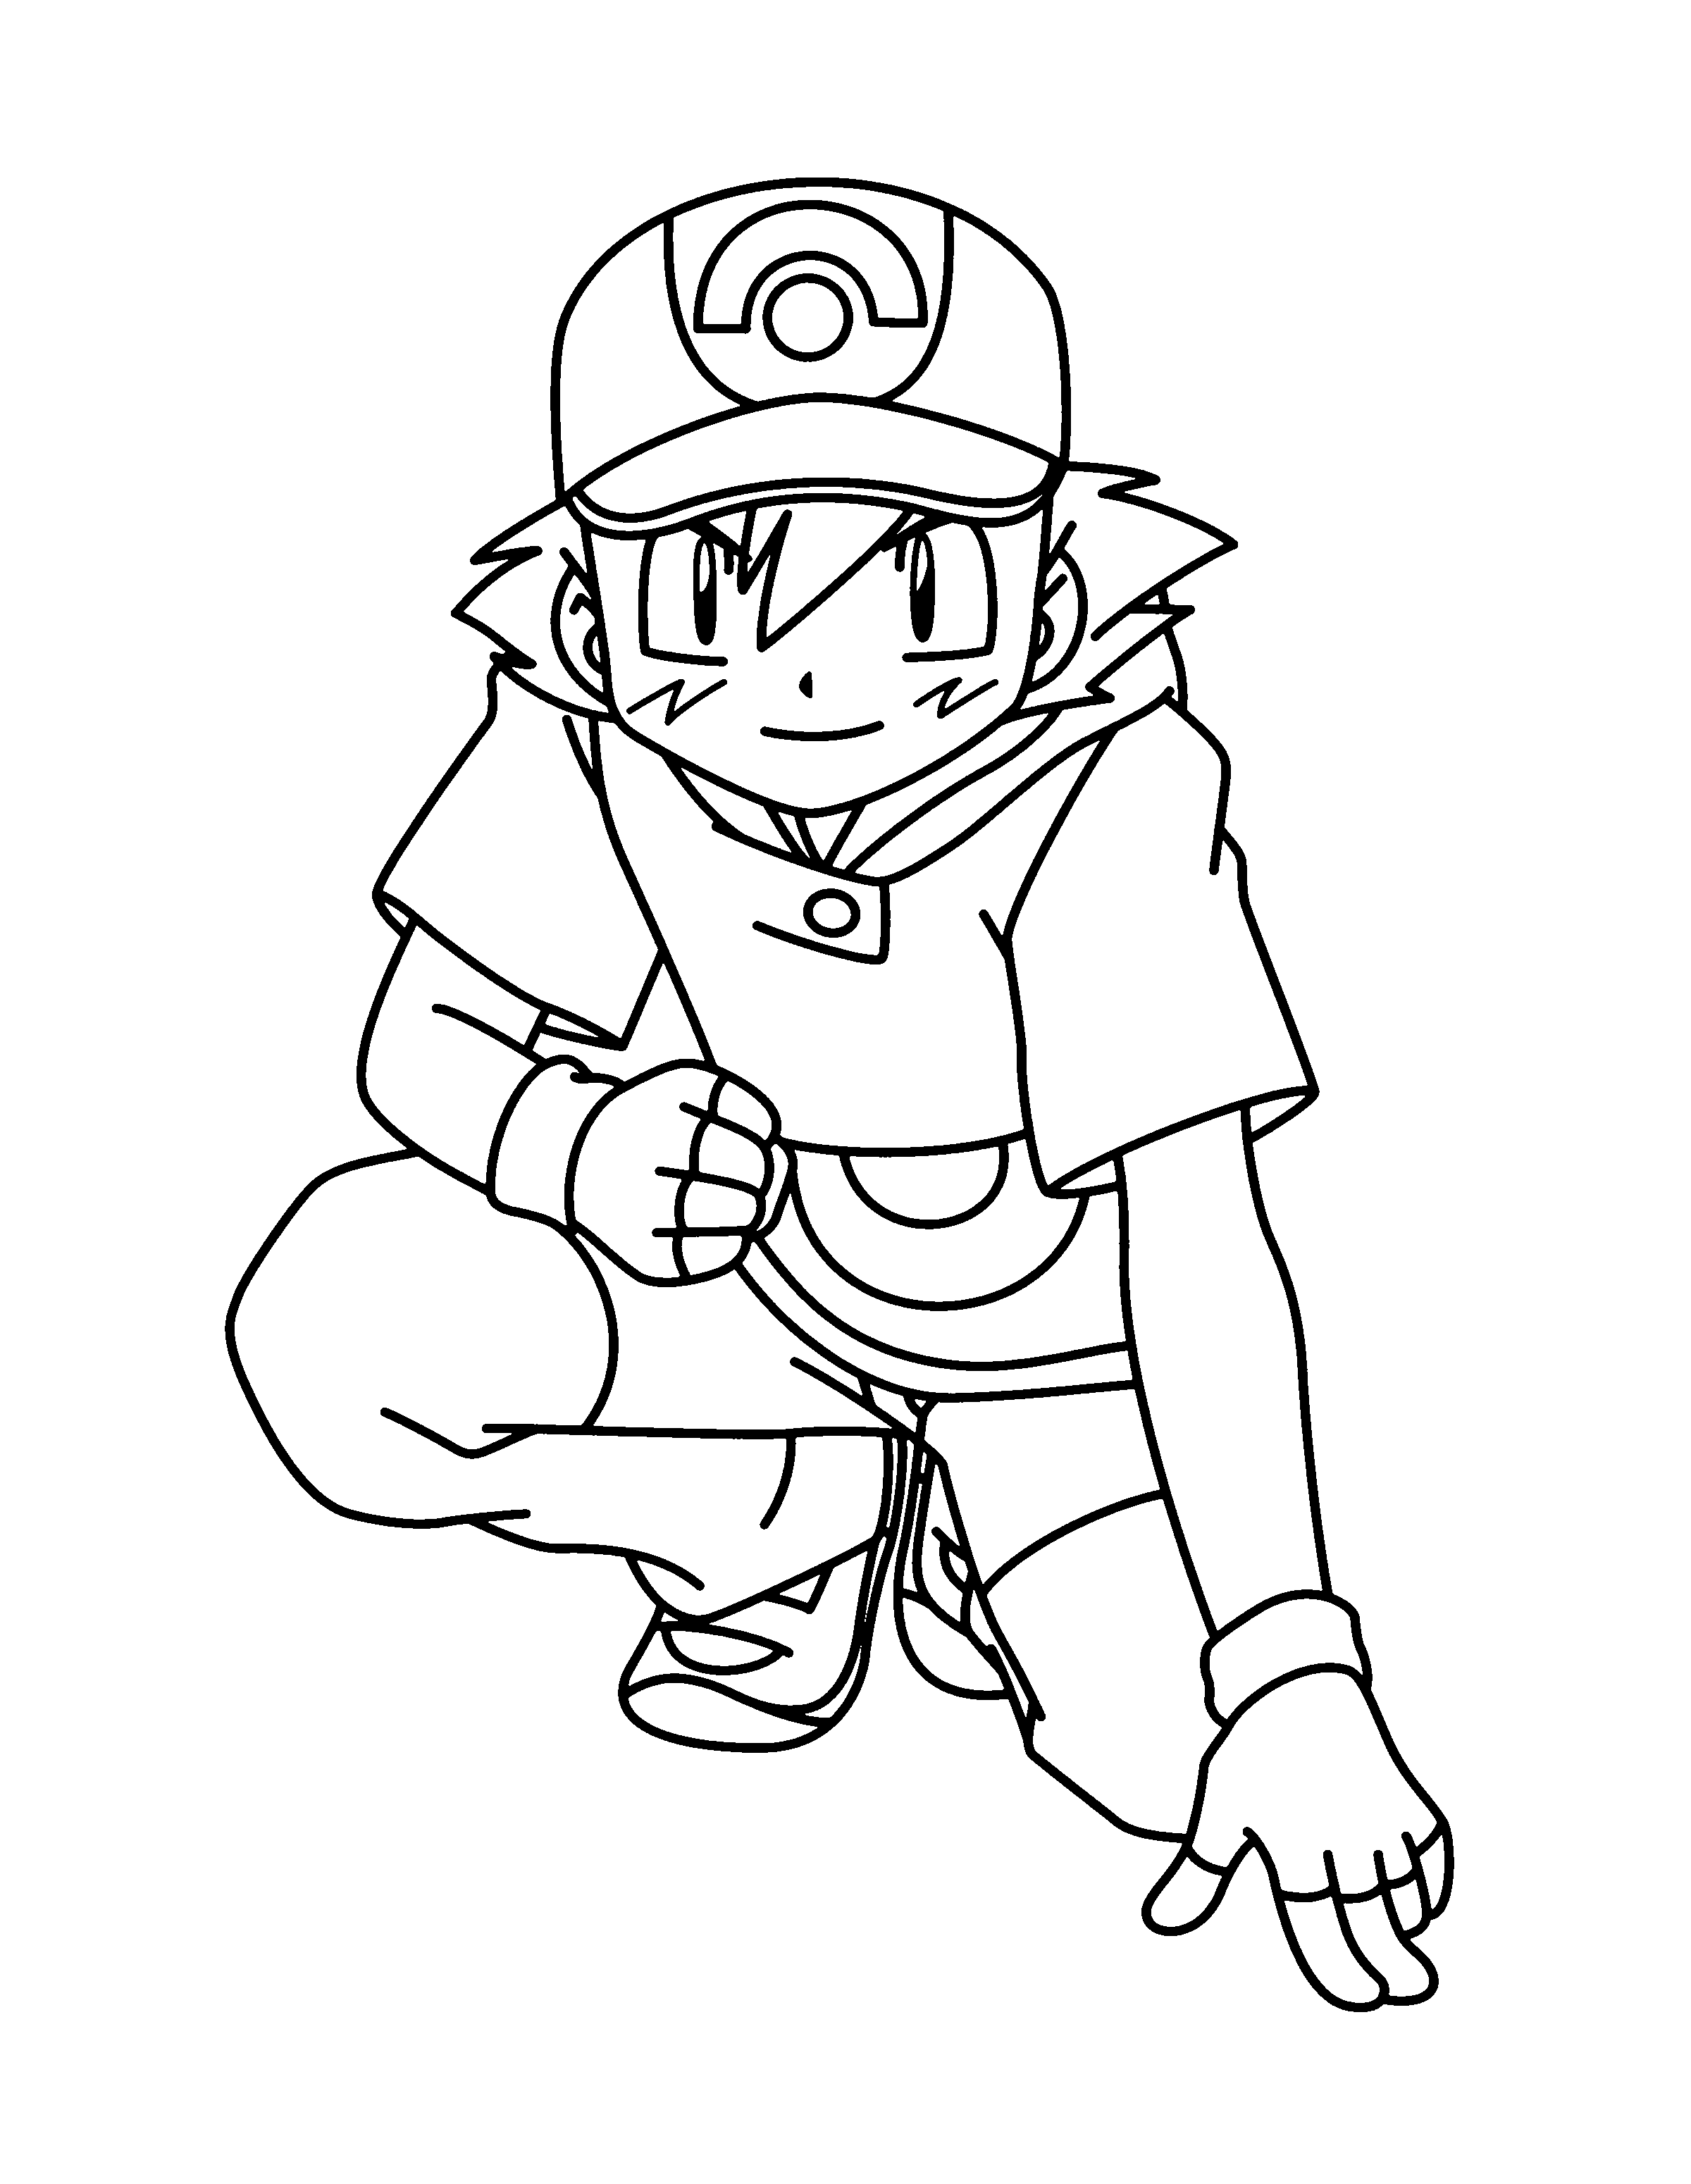 Coloring Page Pokemon Advanced Coloring Pages 21